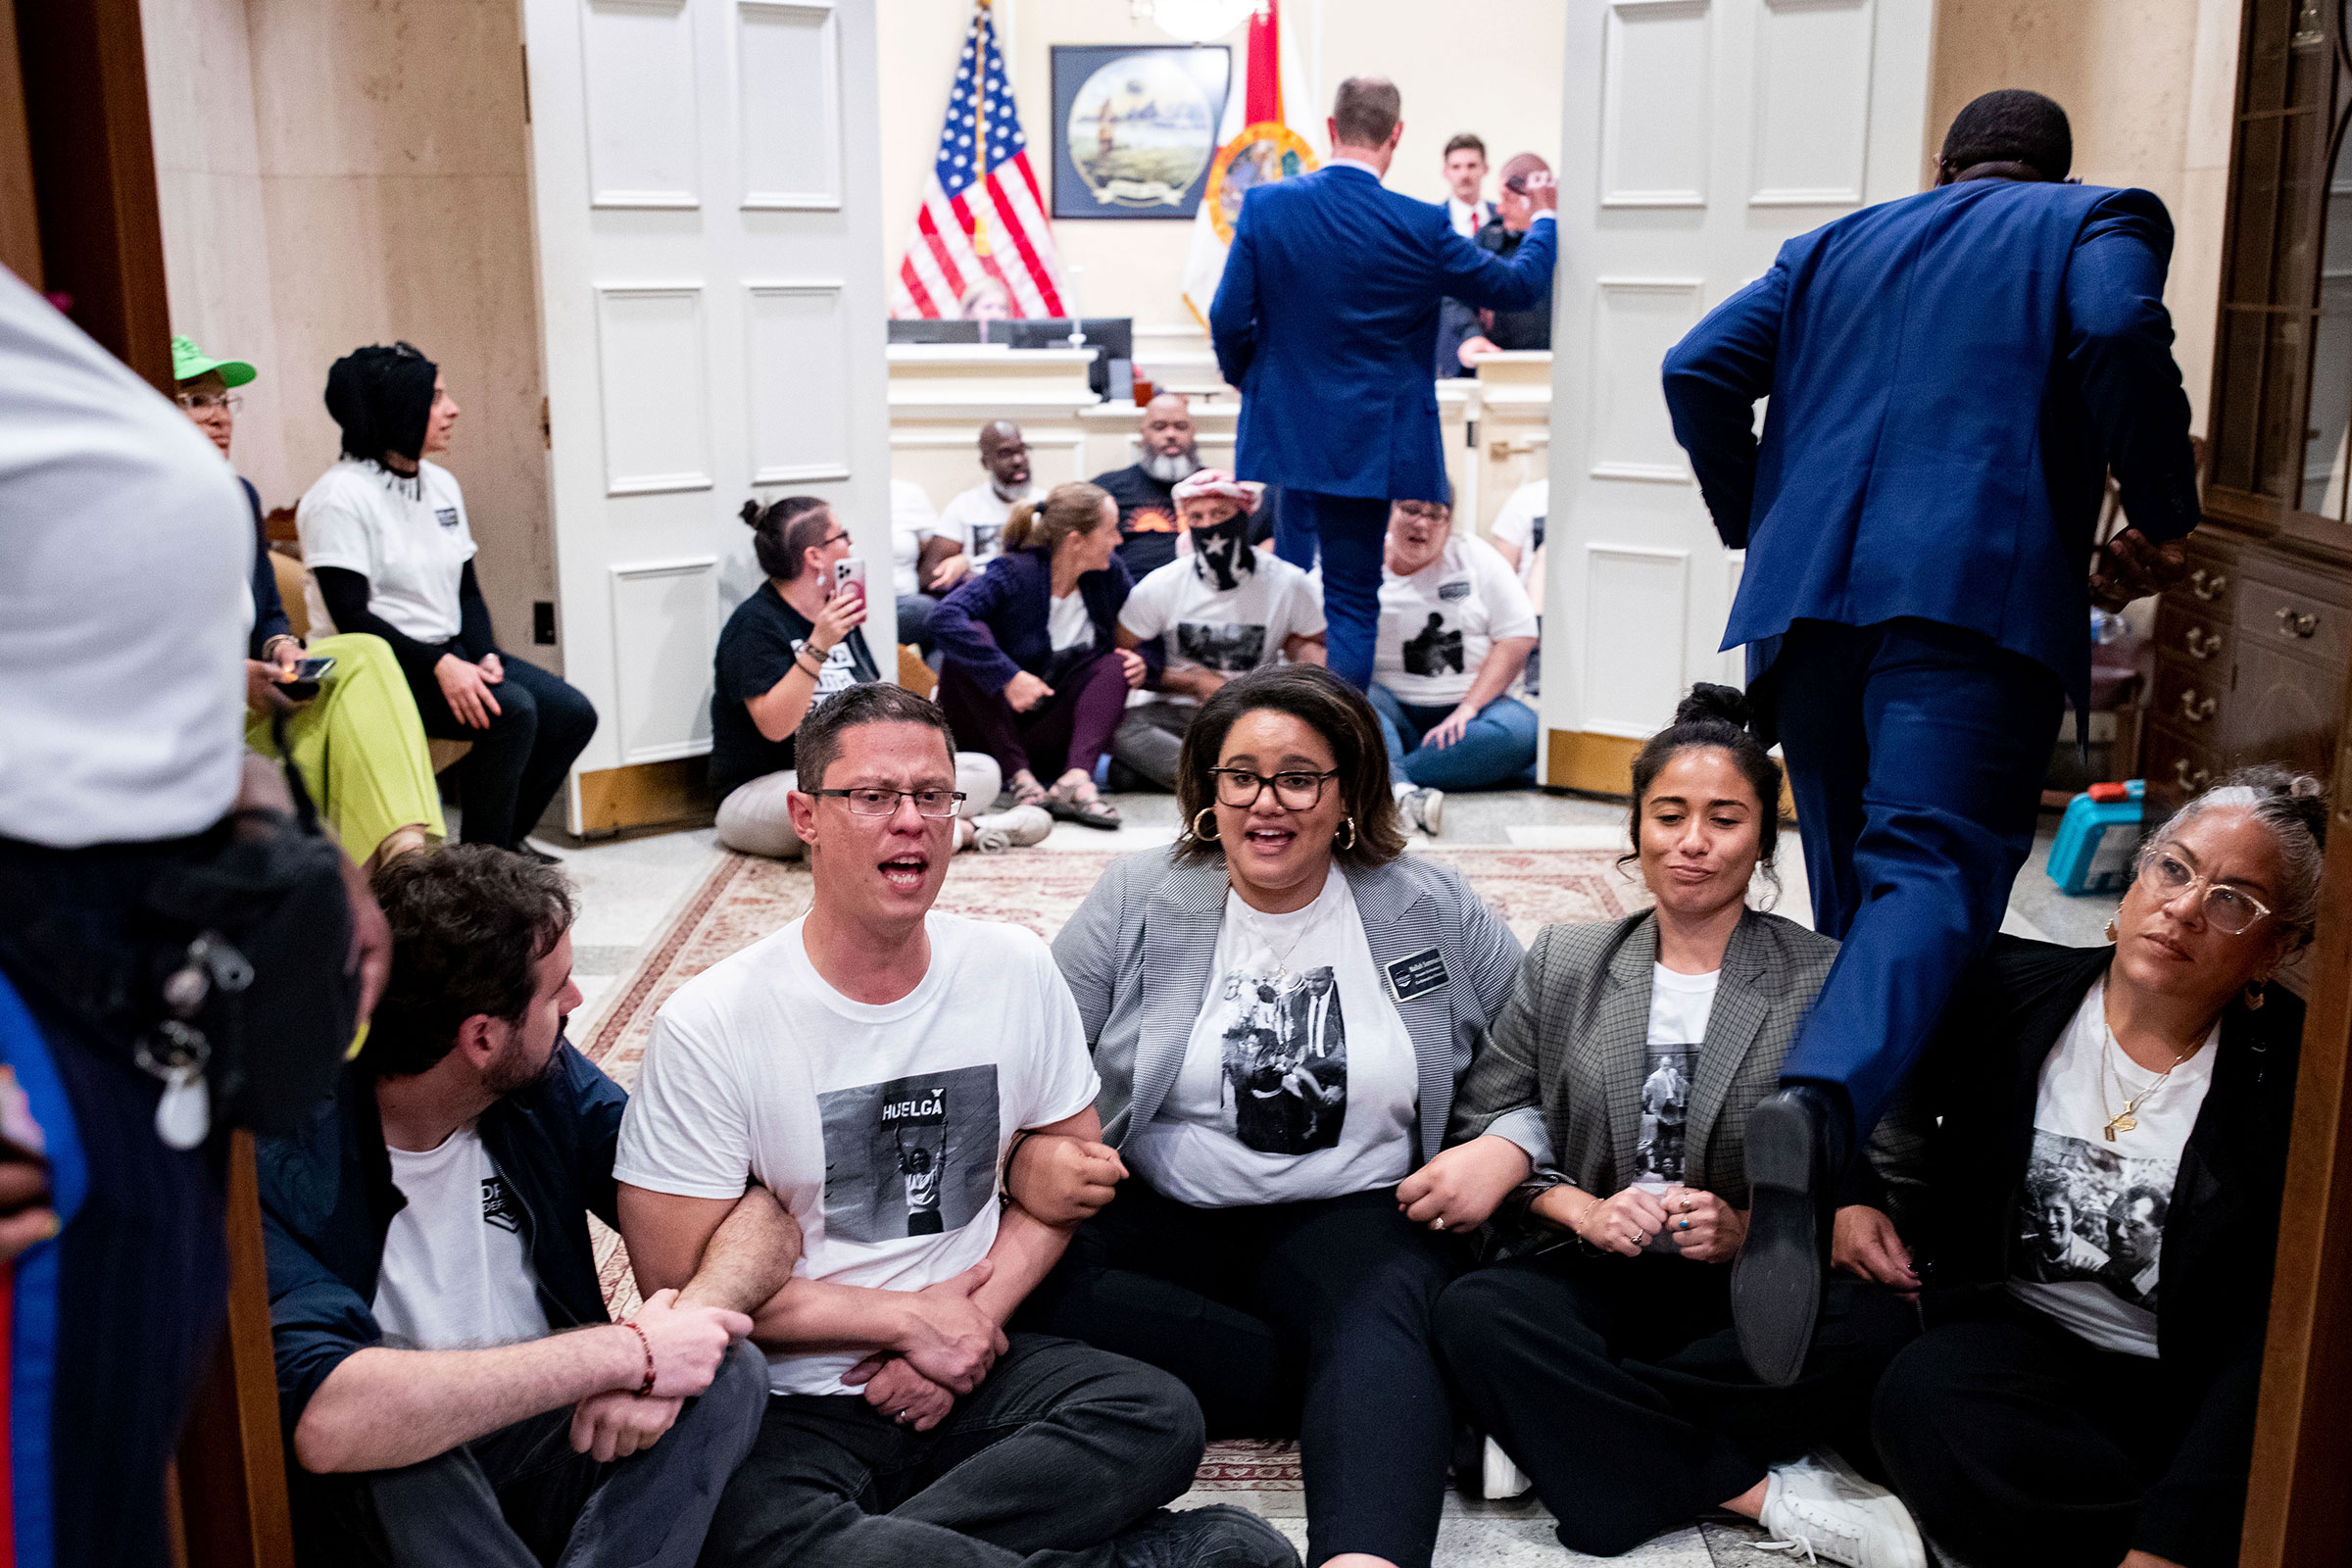 Activists stage a sit-in outside DeSantis' office as they speak out against the governor and his policies on May 3 (Alicia Devine—Tallahassee Democrat/AP)